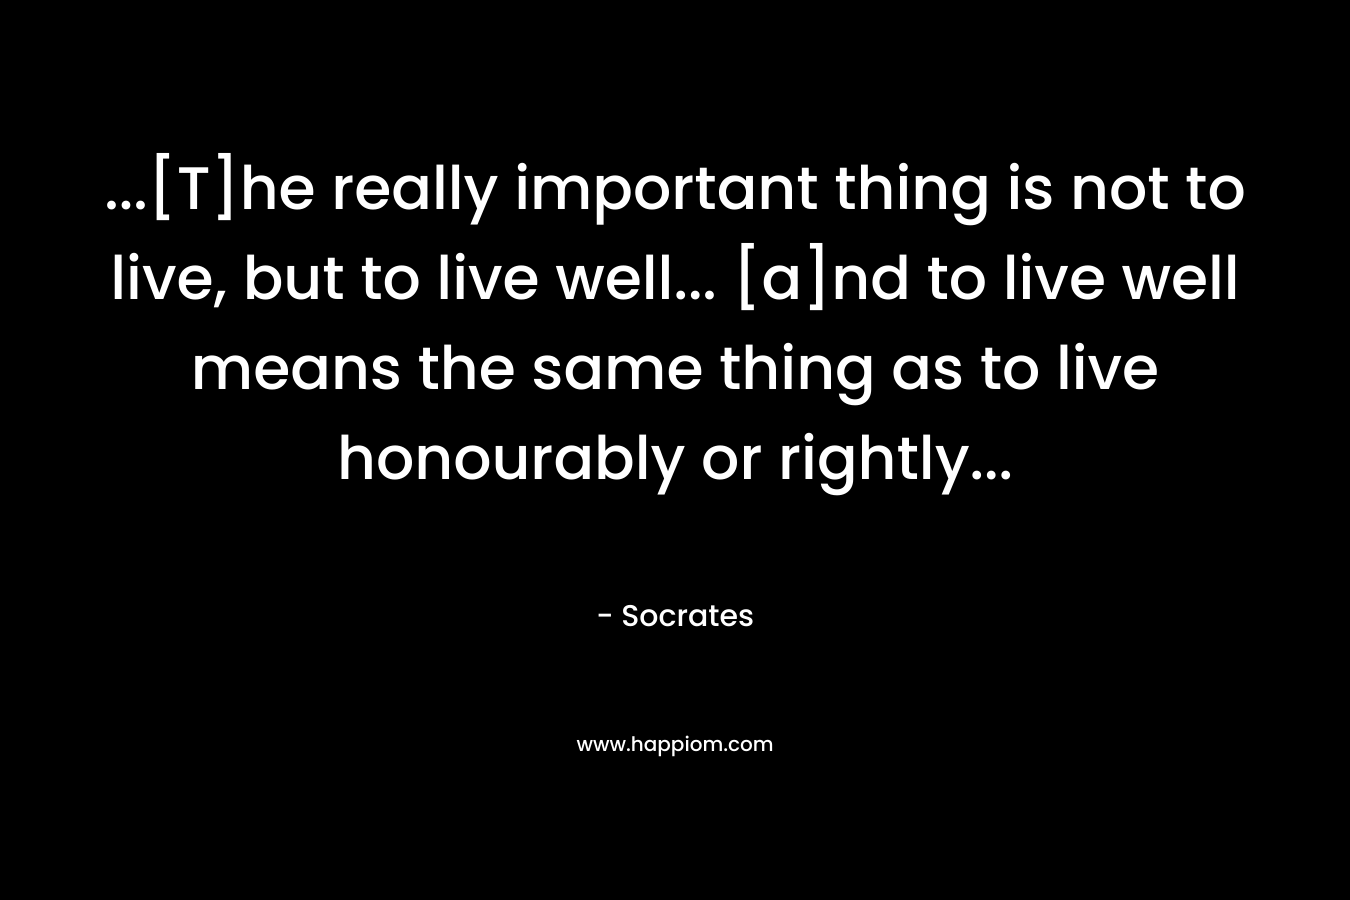 …[T]he really important thing is not to live, but to live well… [a]nd to live well means the same thing as to live honourably or rightly… – Socrates